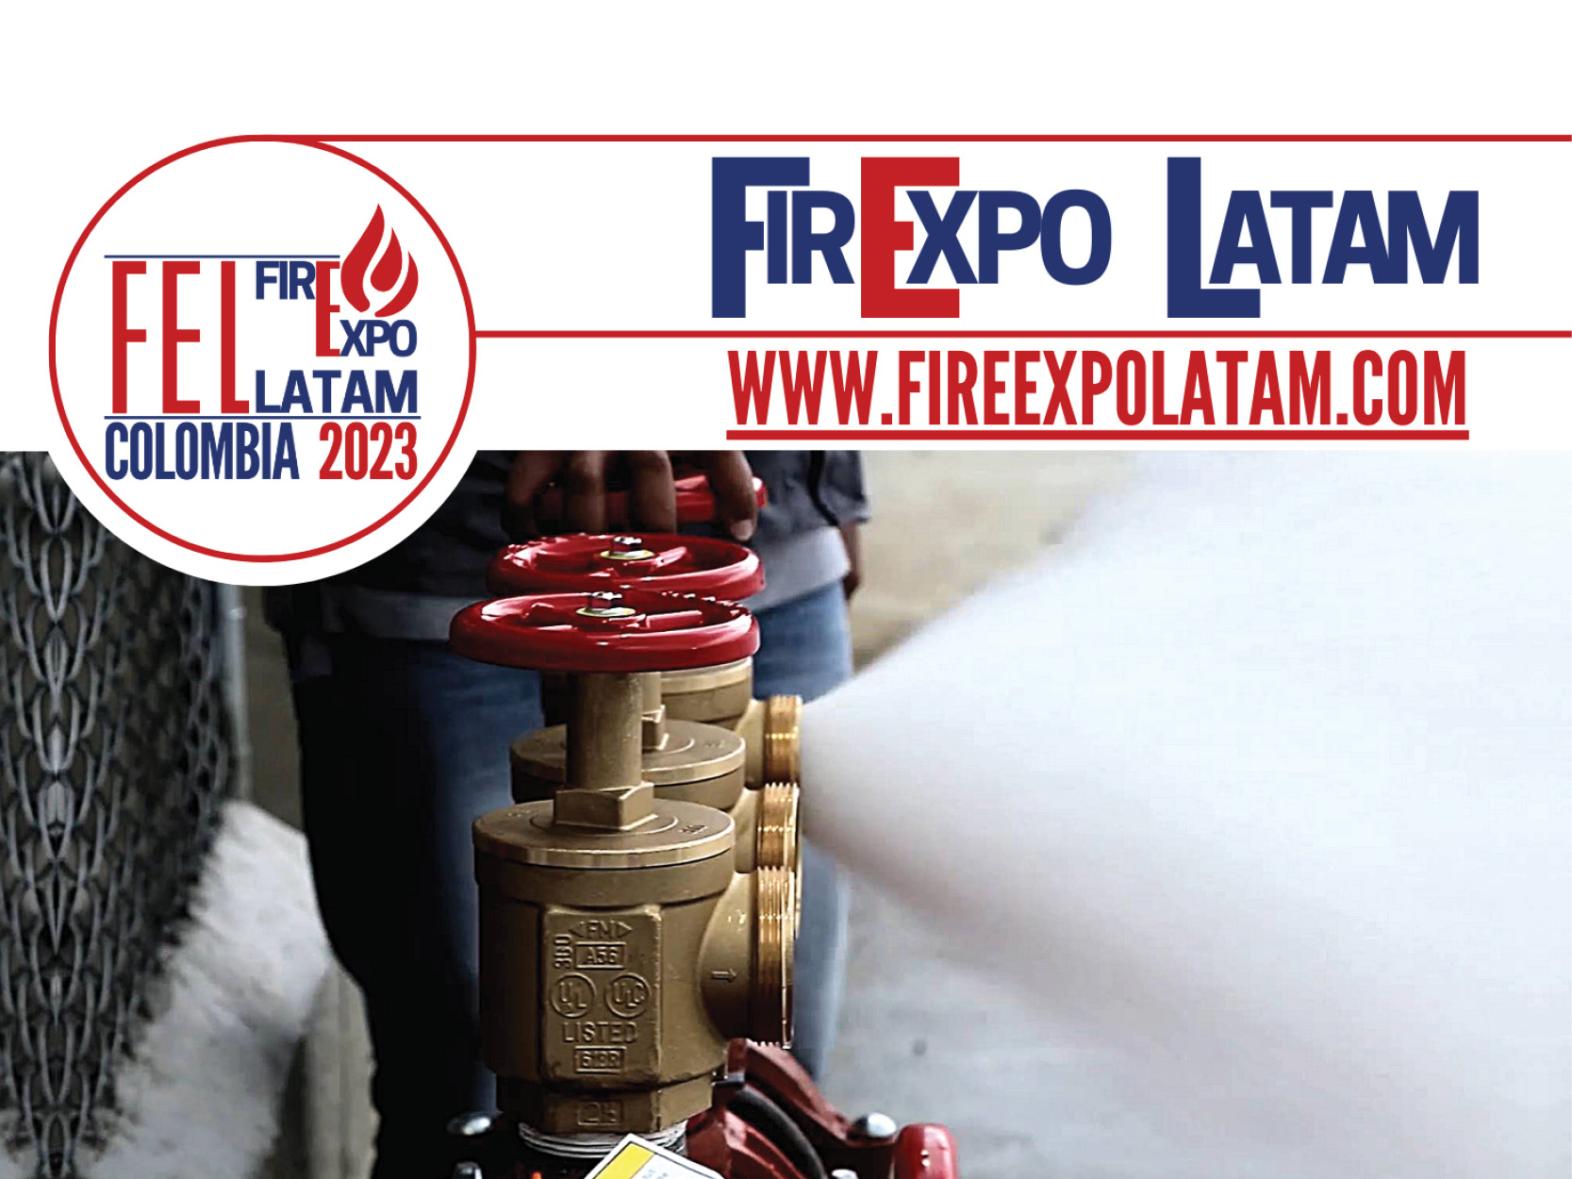 Fire Expo graphic.